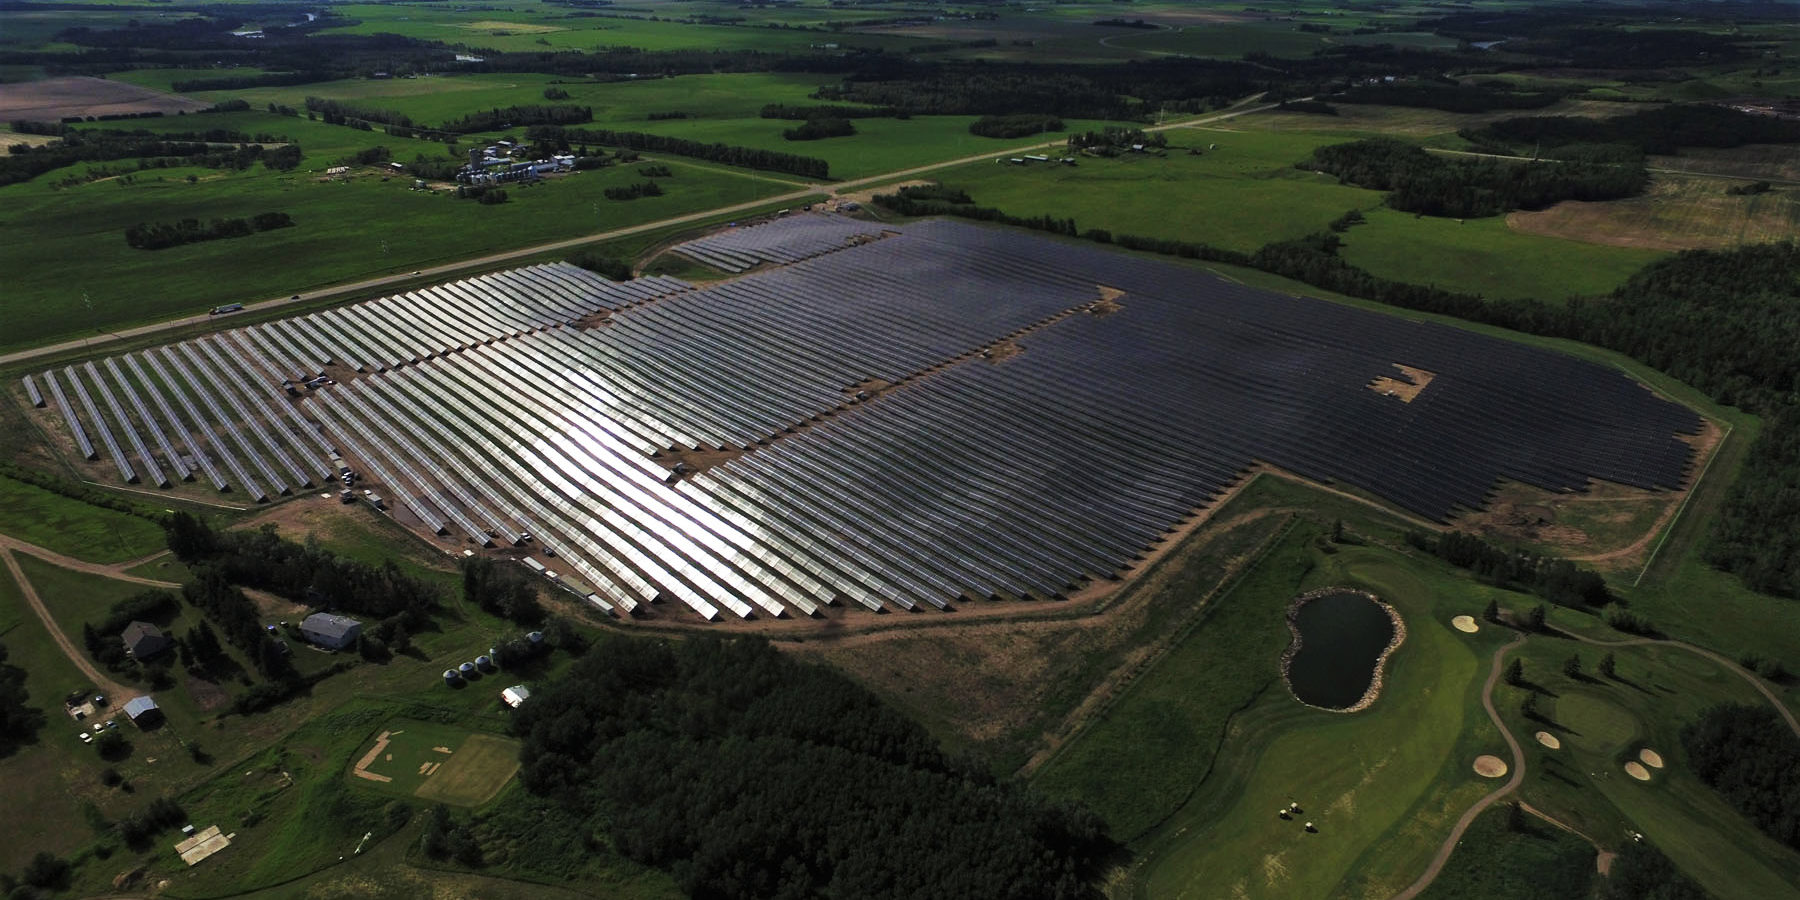 Elemental Energy completes Acquisition and Development of, and Starts Construction on, the Innisfail Solar Project